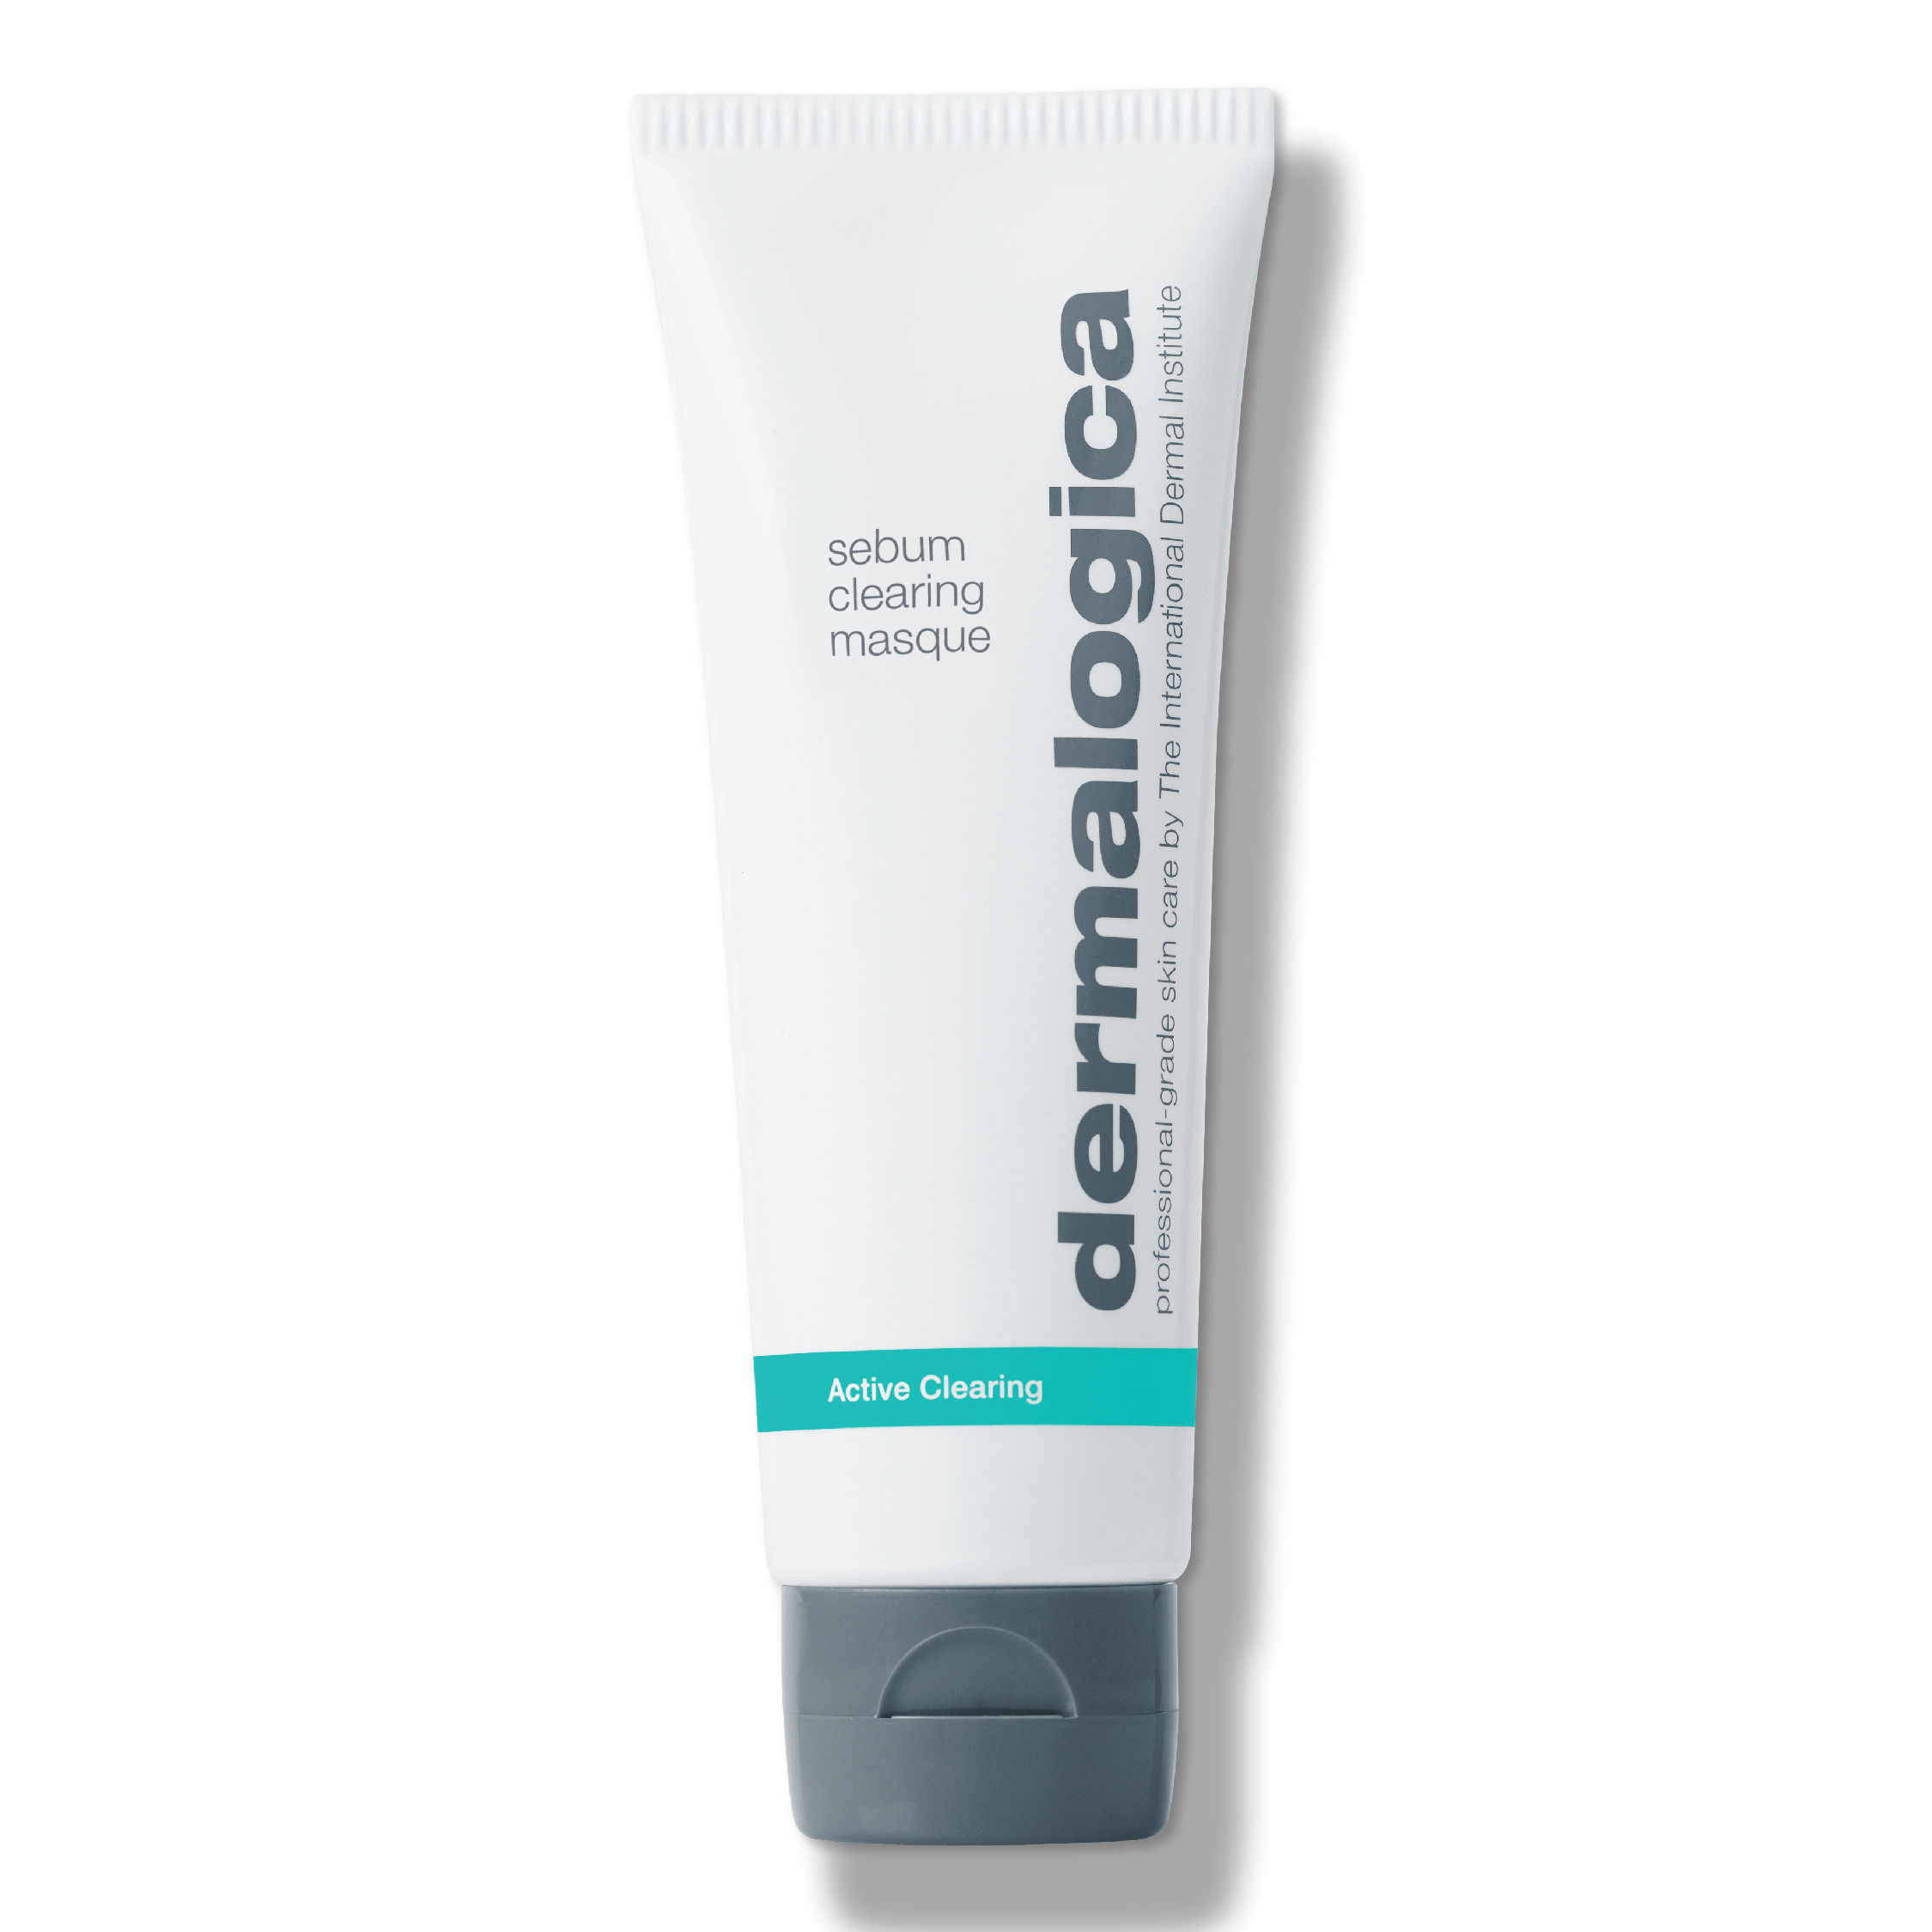 Dermalogica Sebum Clearing Masque Oil-control Face Mask for Acne-Prone Skin With Salicylic Acid & Nicinamide